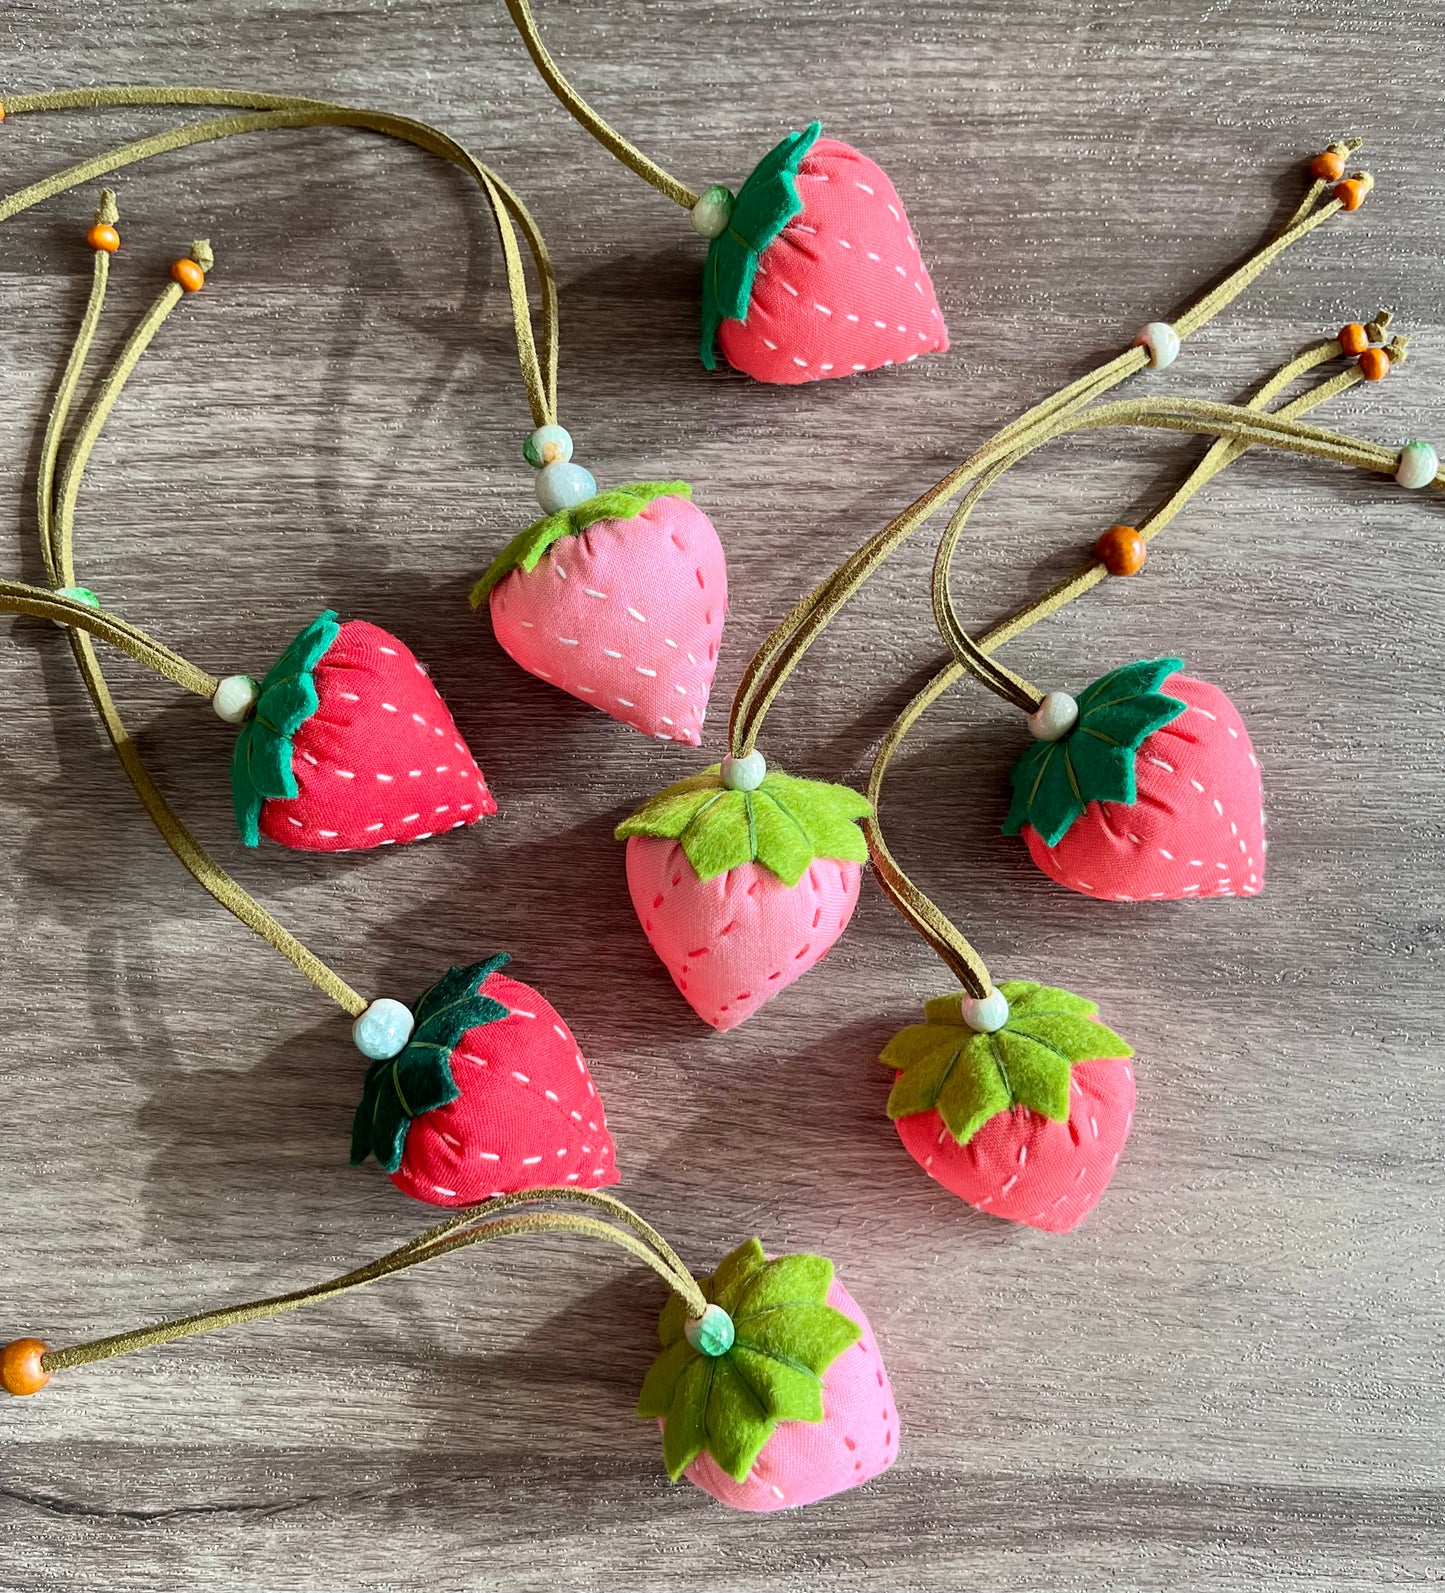 Hand-sewing strawberry shaped sachet with lavender scent. Adjustable length strawberry fabric necklace / bag ornament / car sachet.